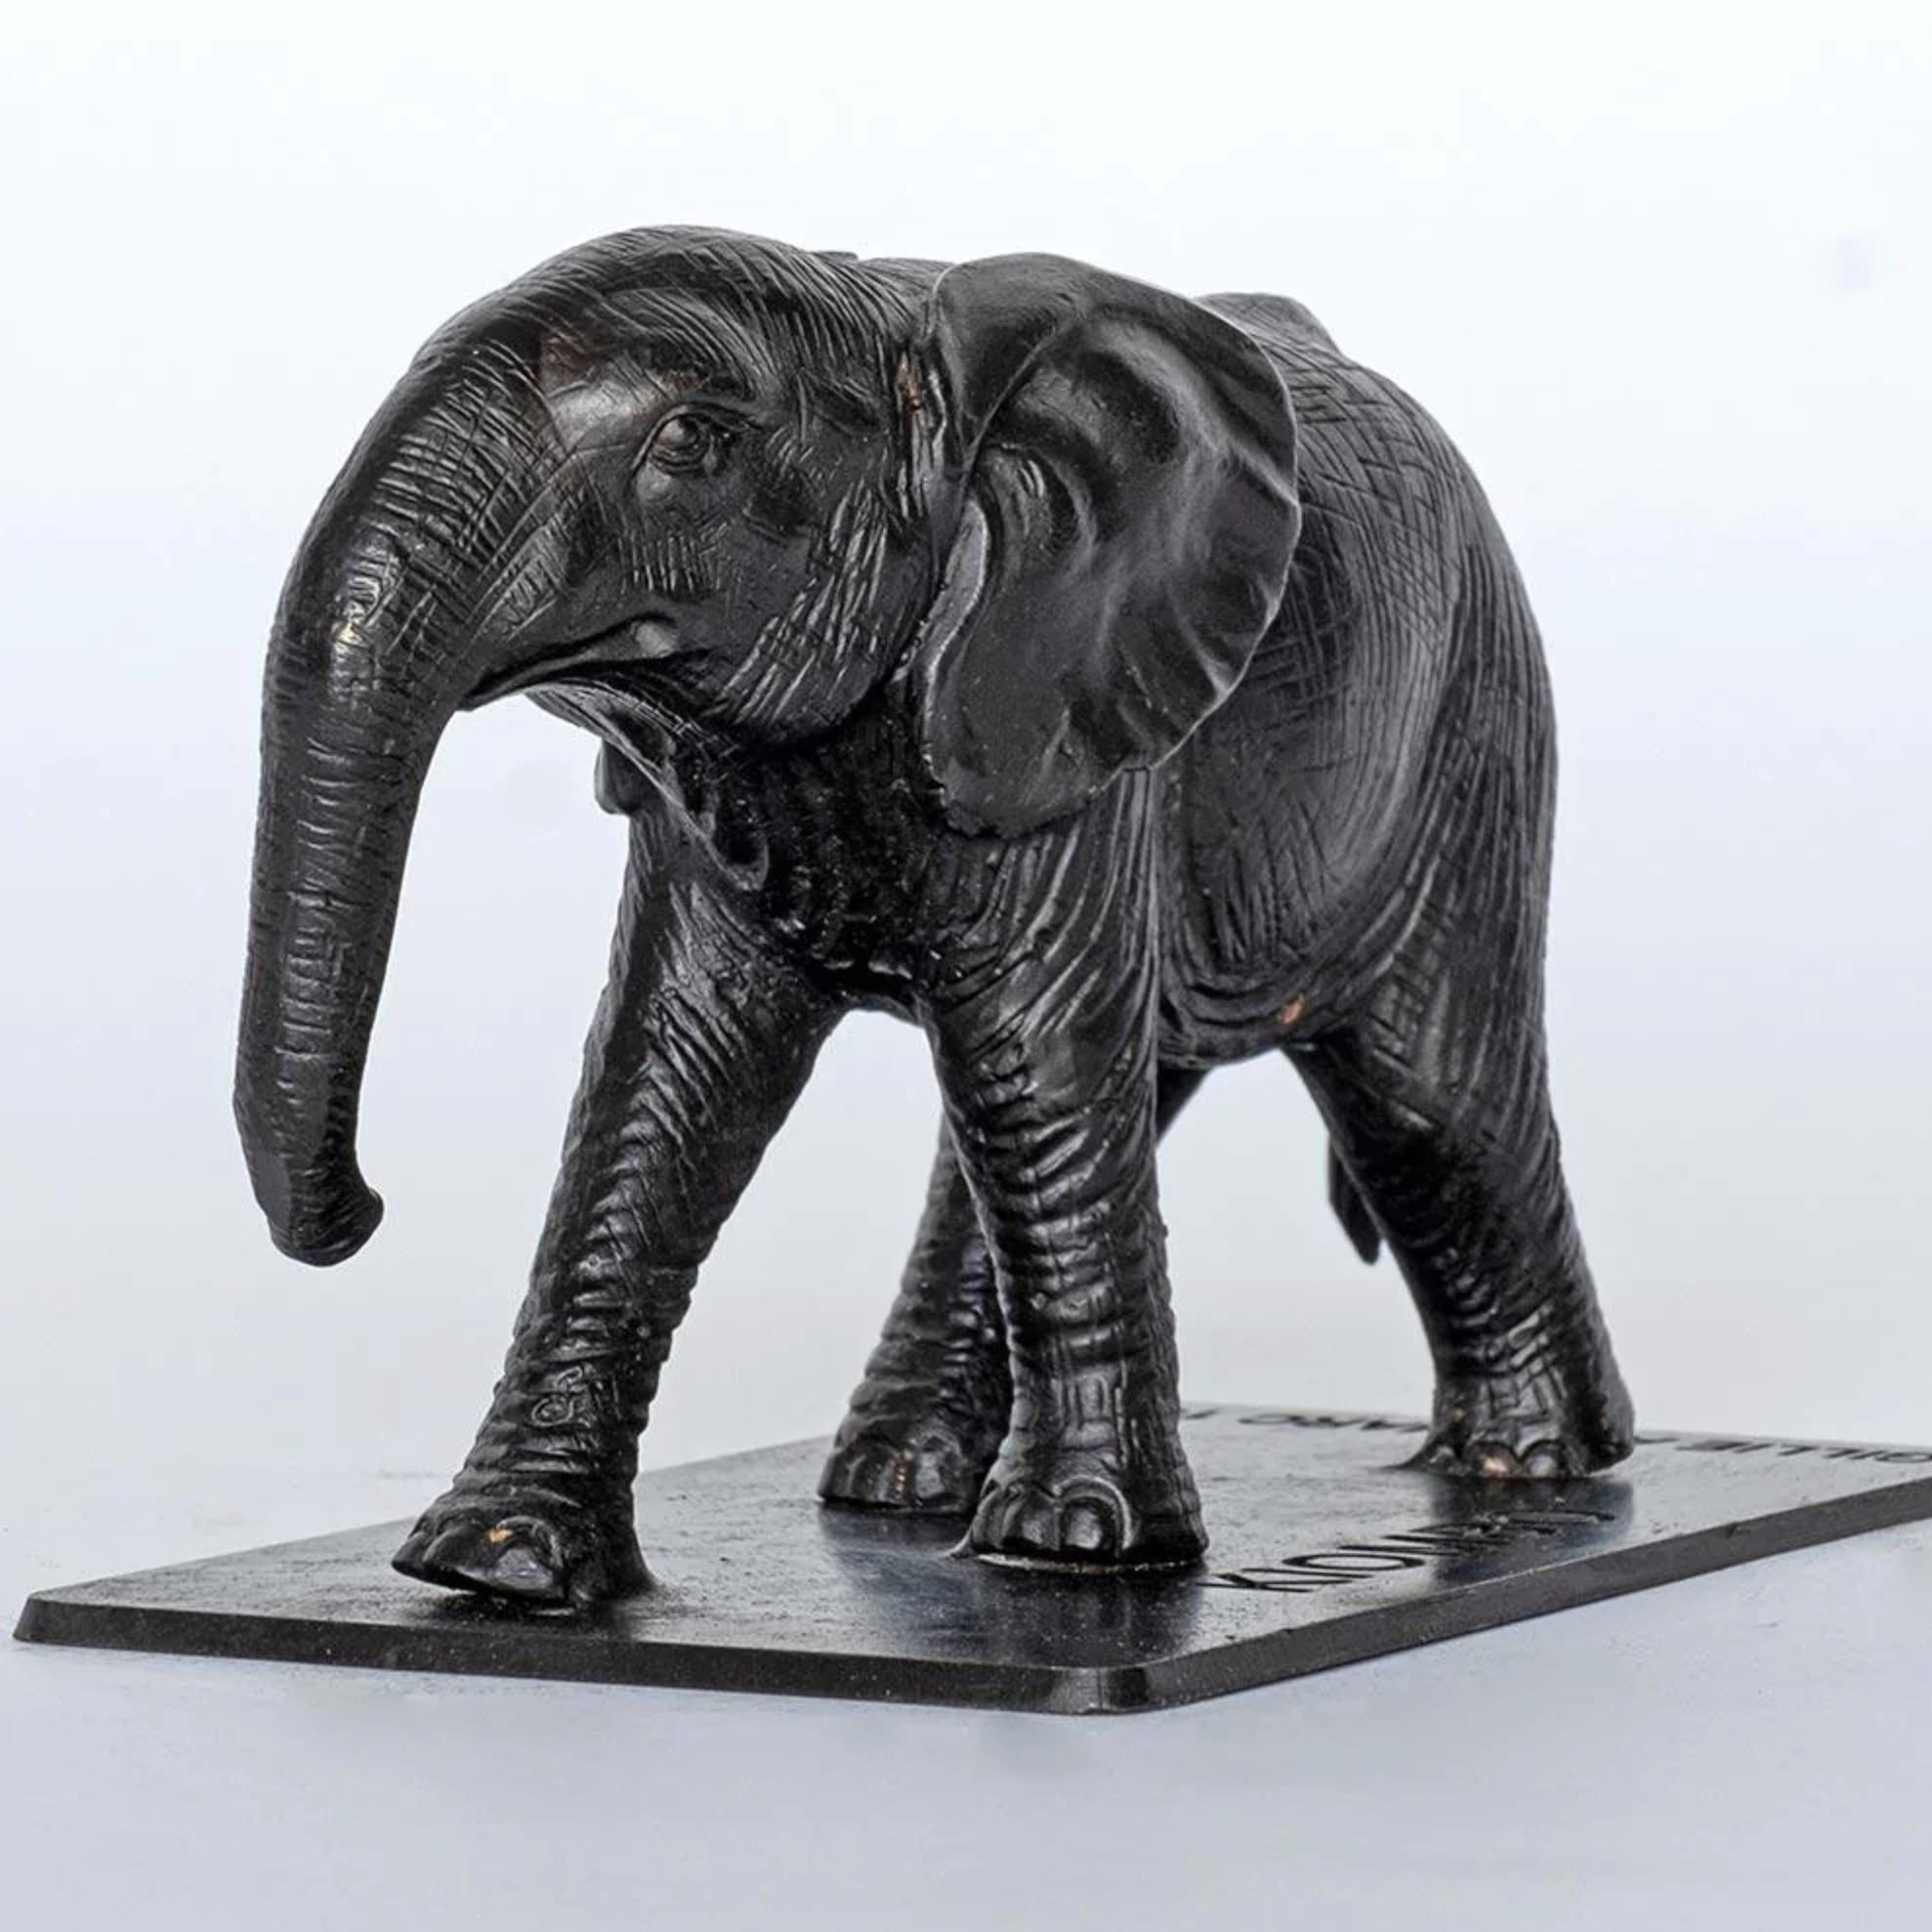 Authentic Bronze Orphan Kiombo Elephant Sculpture by Gillie and Marc - Art by Gillie and Marc Schattner